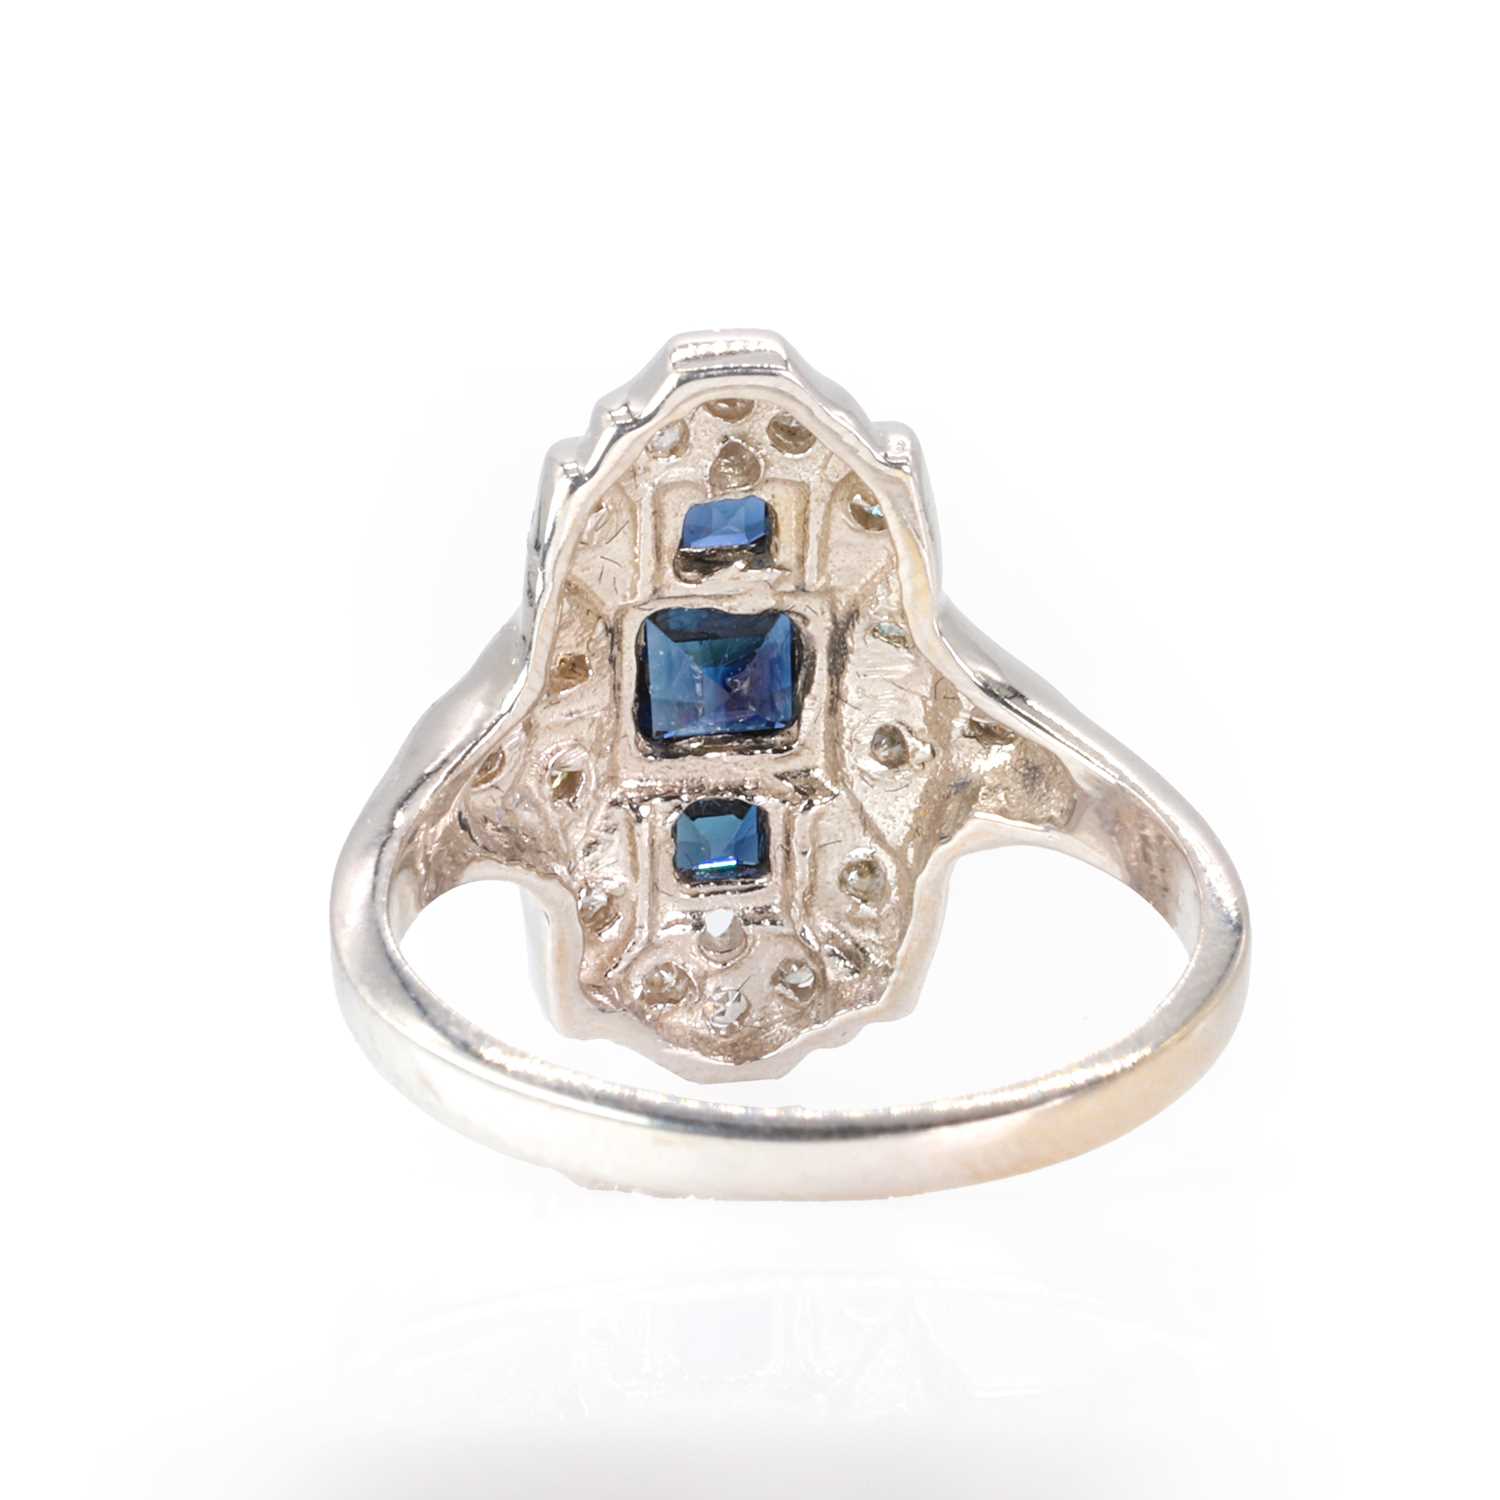 A 14ct white gold Art Deco style sapphire and diamond ring, - Image 3 of 3